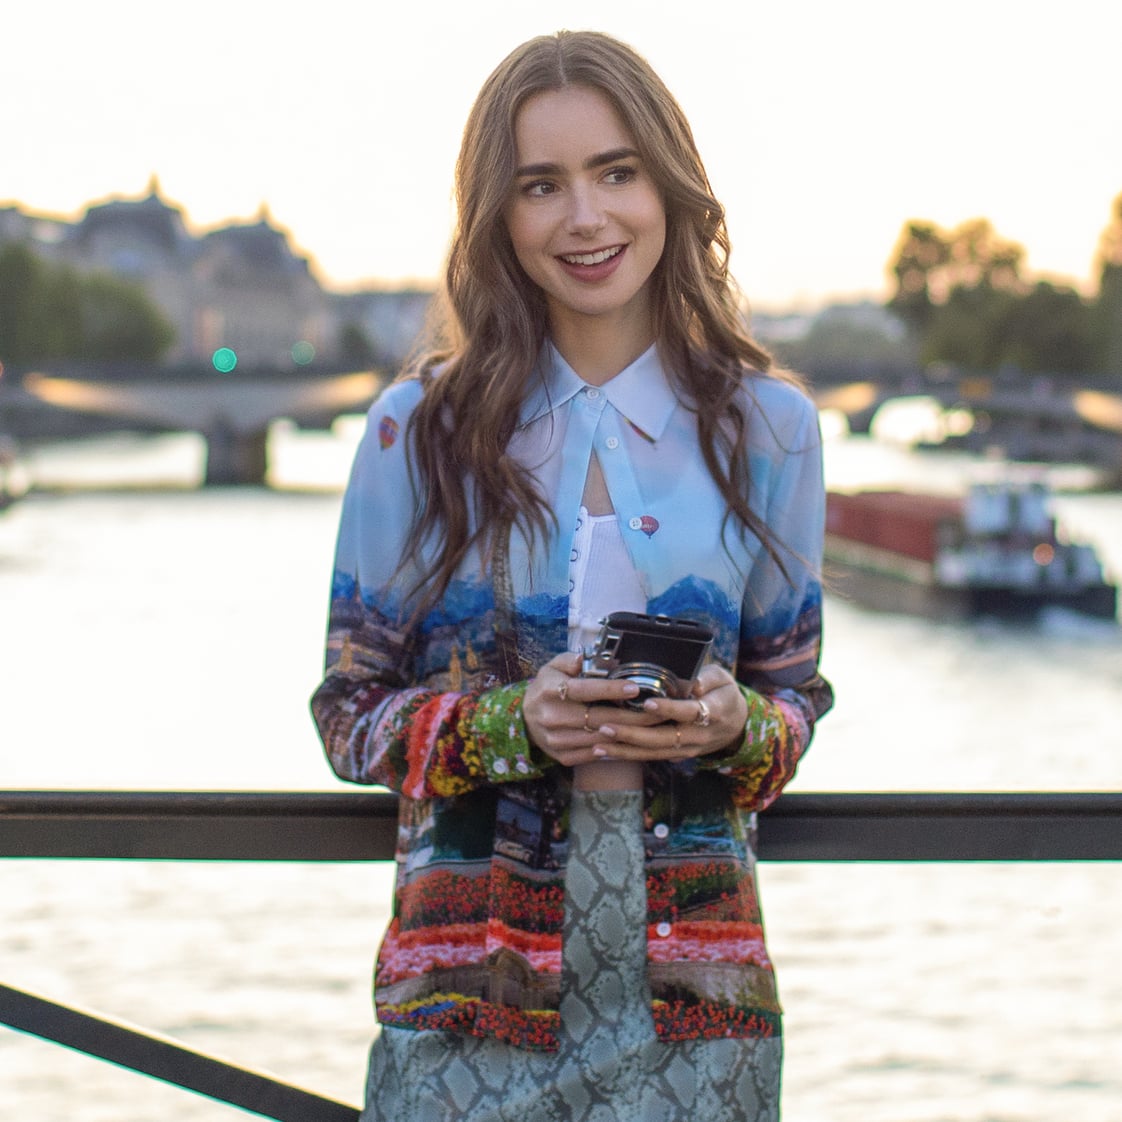 Best Lily Collins Outfit Style from “Emily in Paris Season 1” –